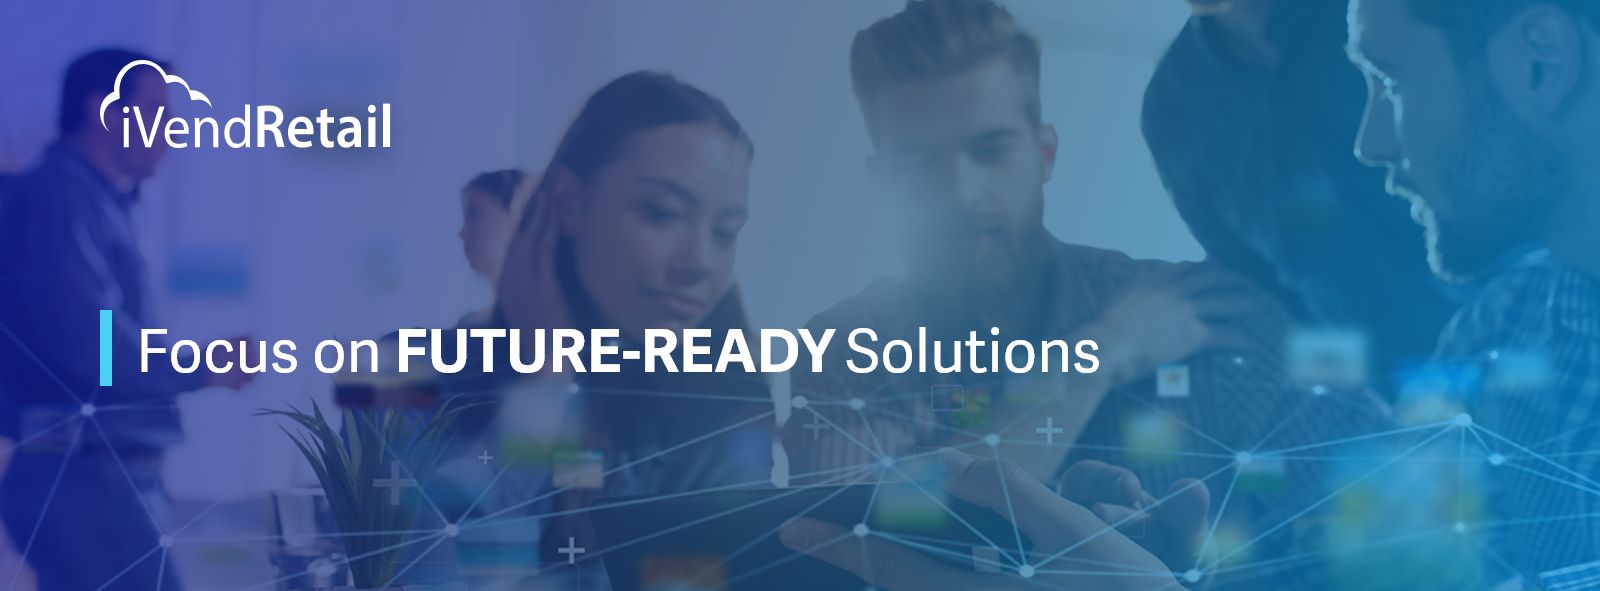 Focus on Future Ready Solutions